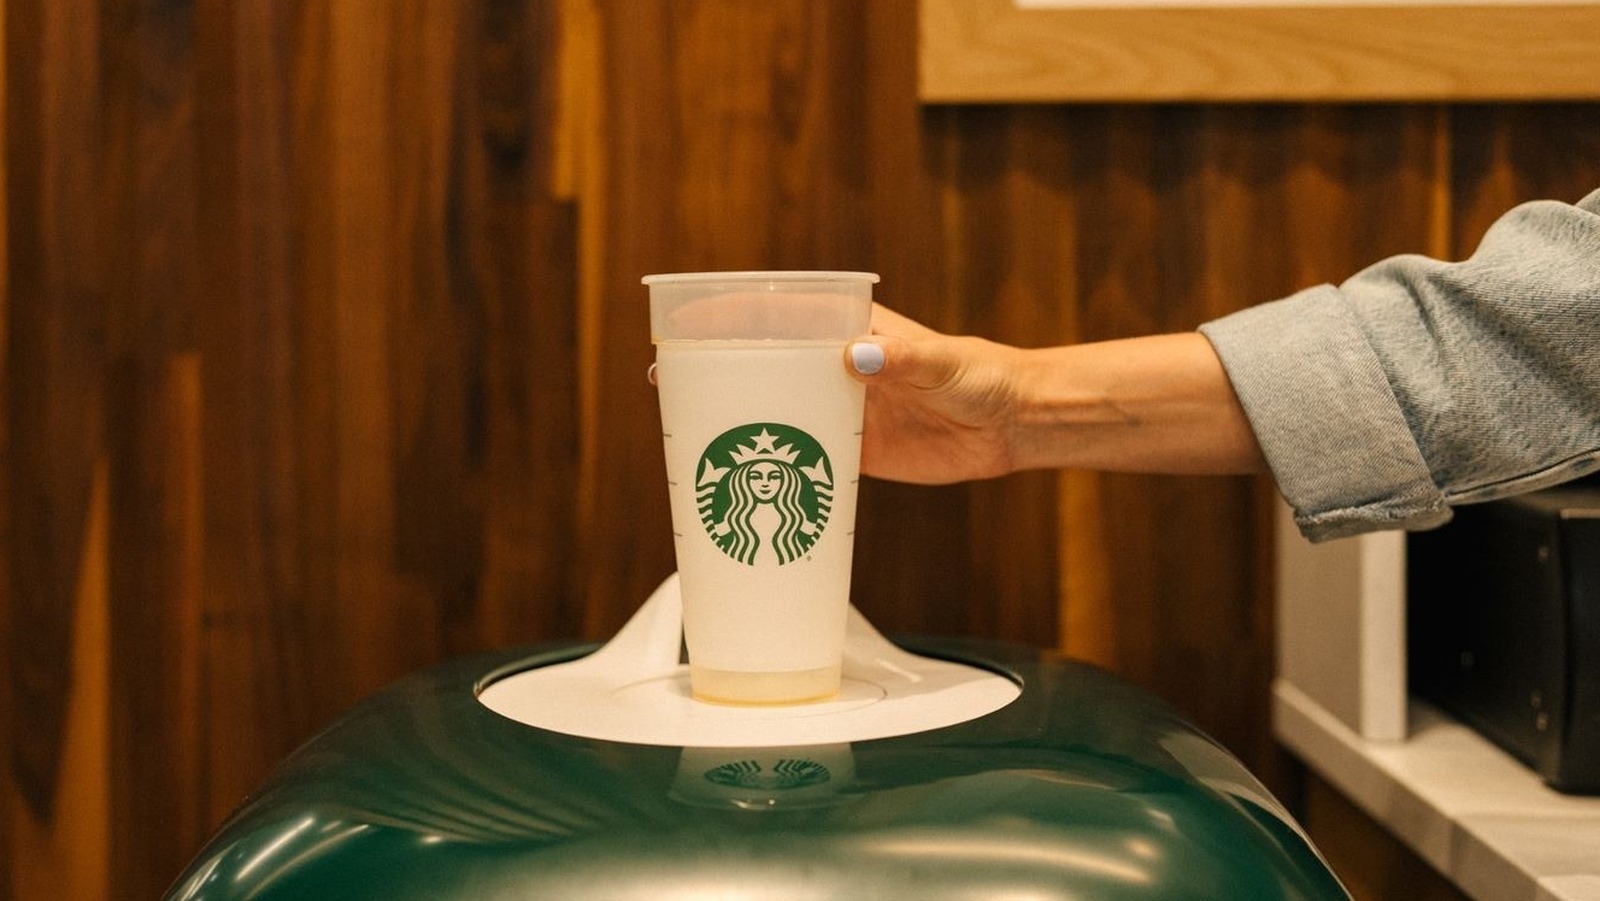 https://www.tastingtable.com/img/gallery/starbucks-is-testing-a-reusable-cup-program-that-could-expand-nationwide/l-intro-1692265029.jpg